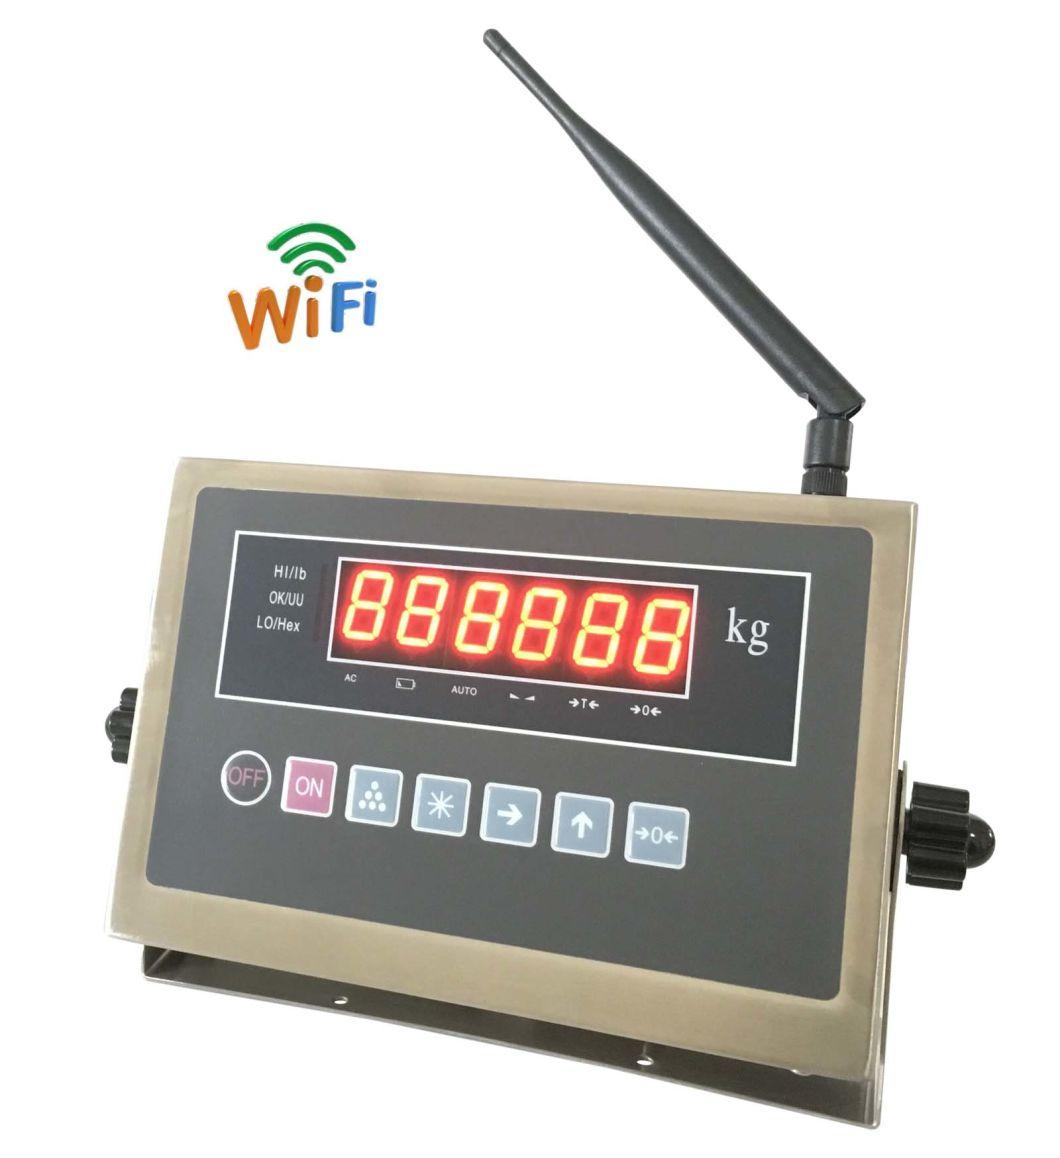 304 Stainless Steel Housing 6-Digital LED Display Wireless Function Indicators Used for Electronic Platform and Weighing Scales (XK315A1-RB-WiFi)